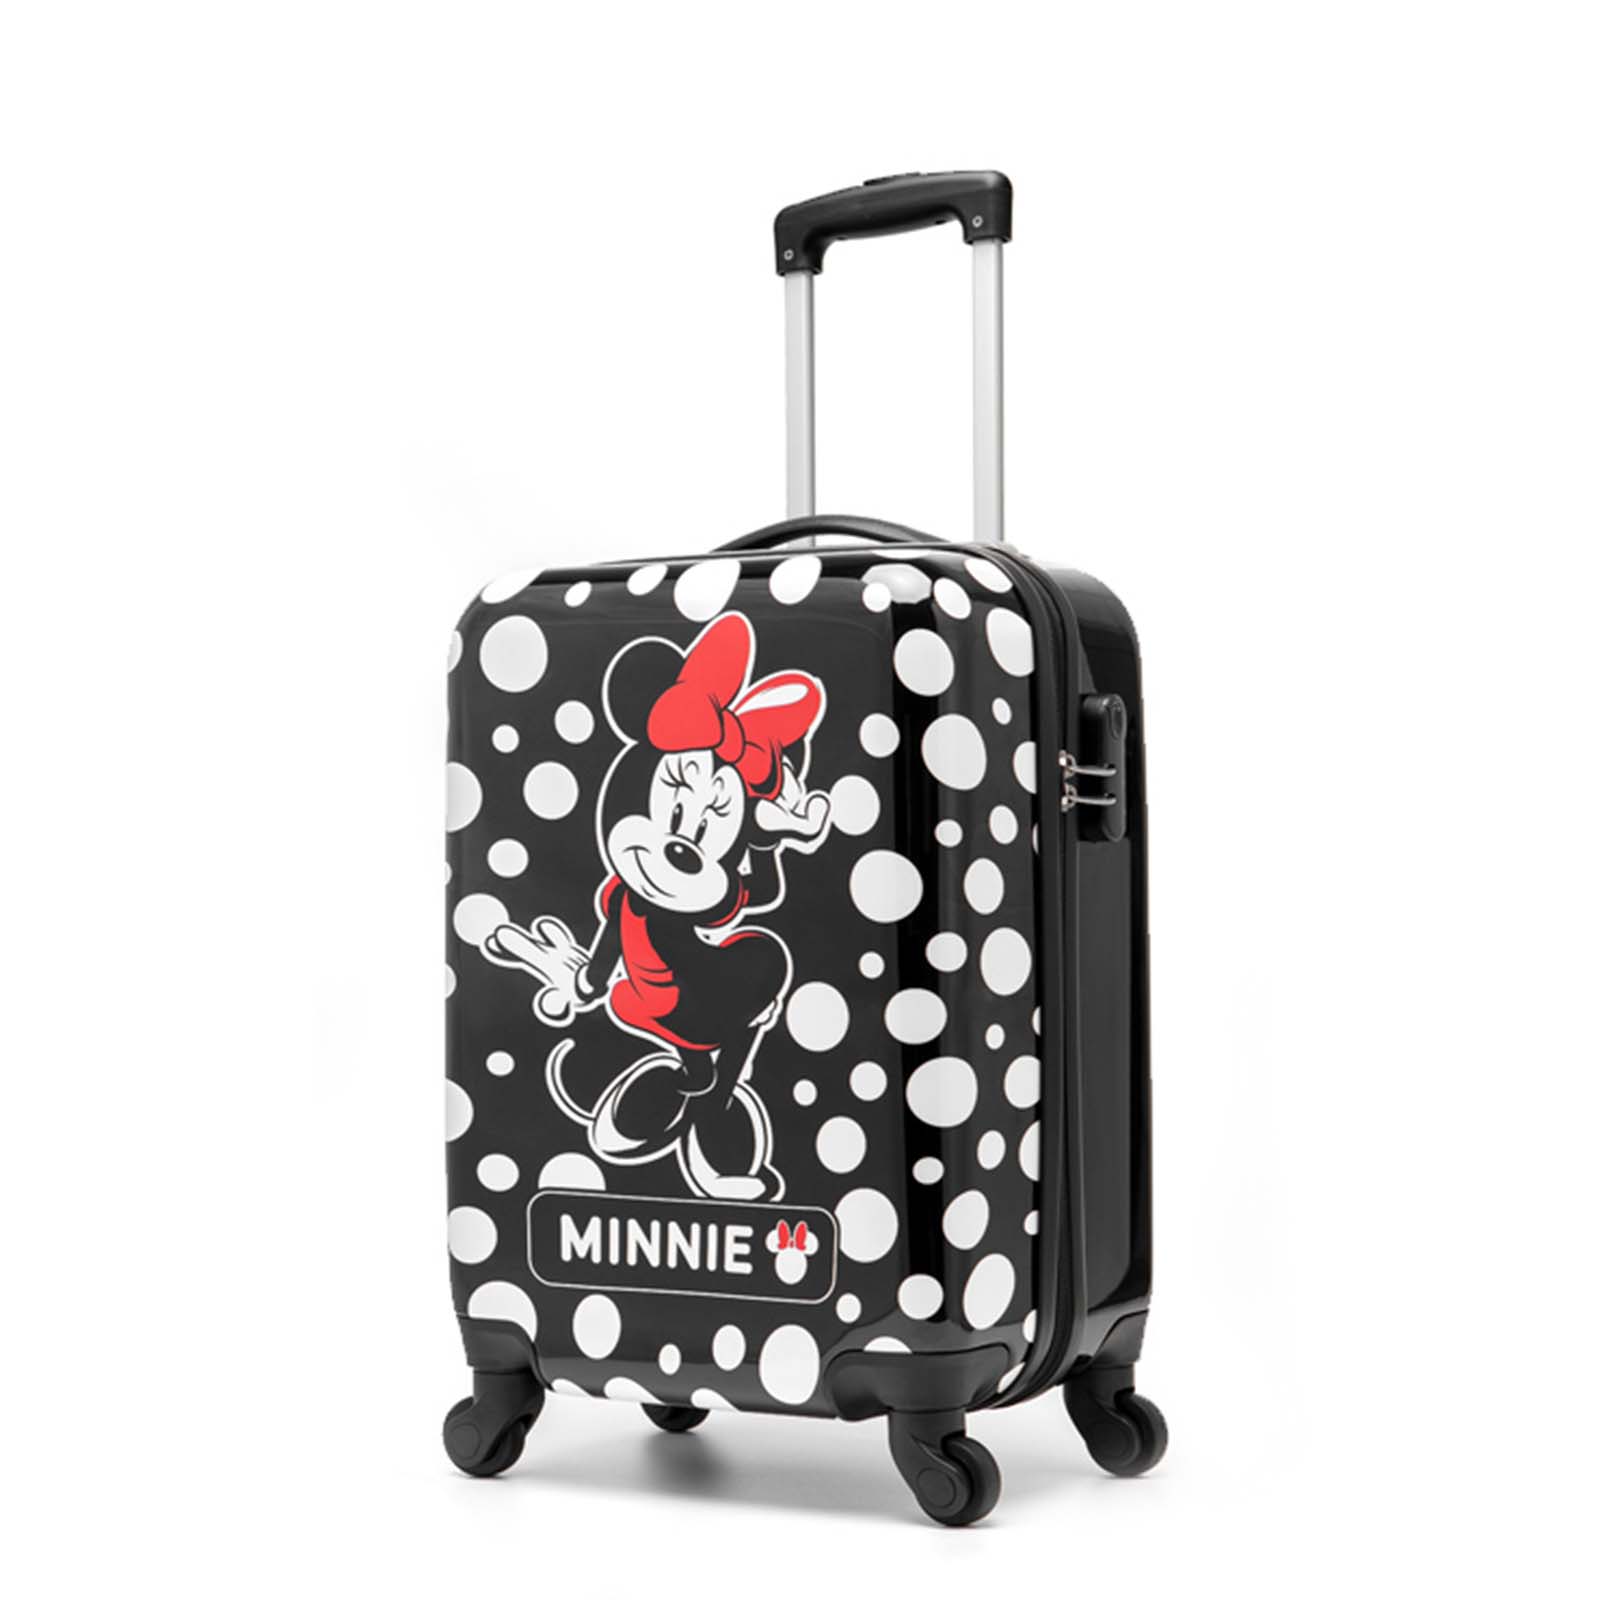 Disney-Minnie-Mouse-20inch-Carry-On-Suitcase-Front-Angle